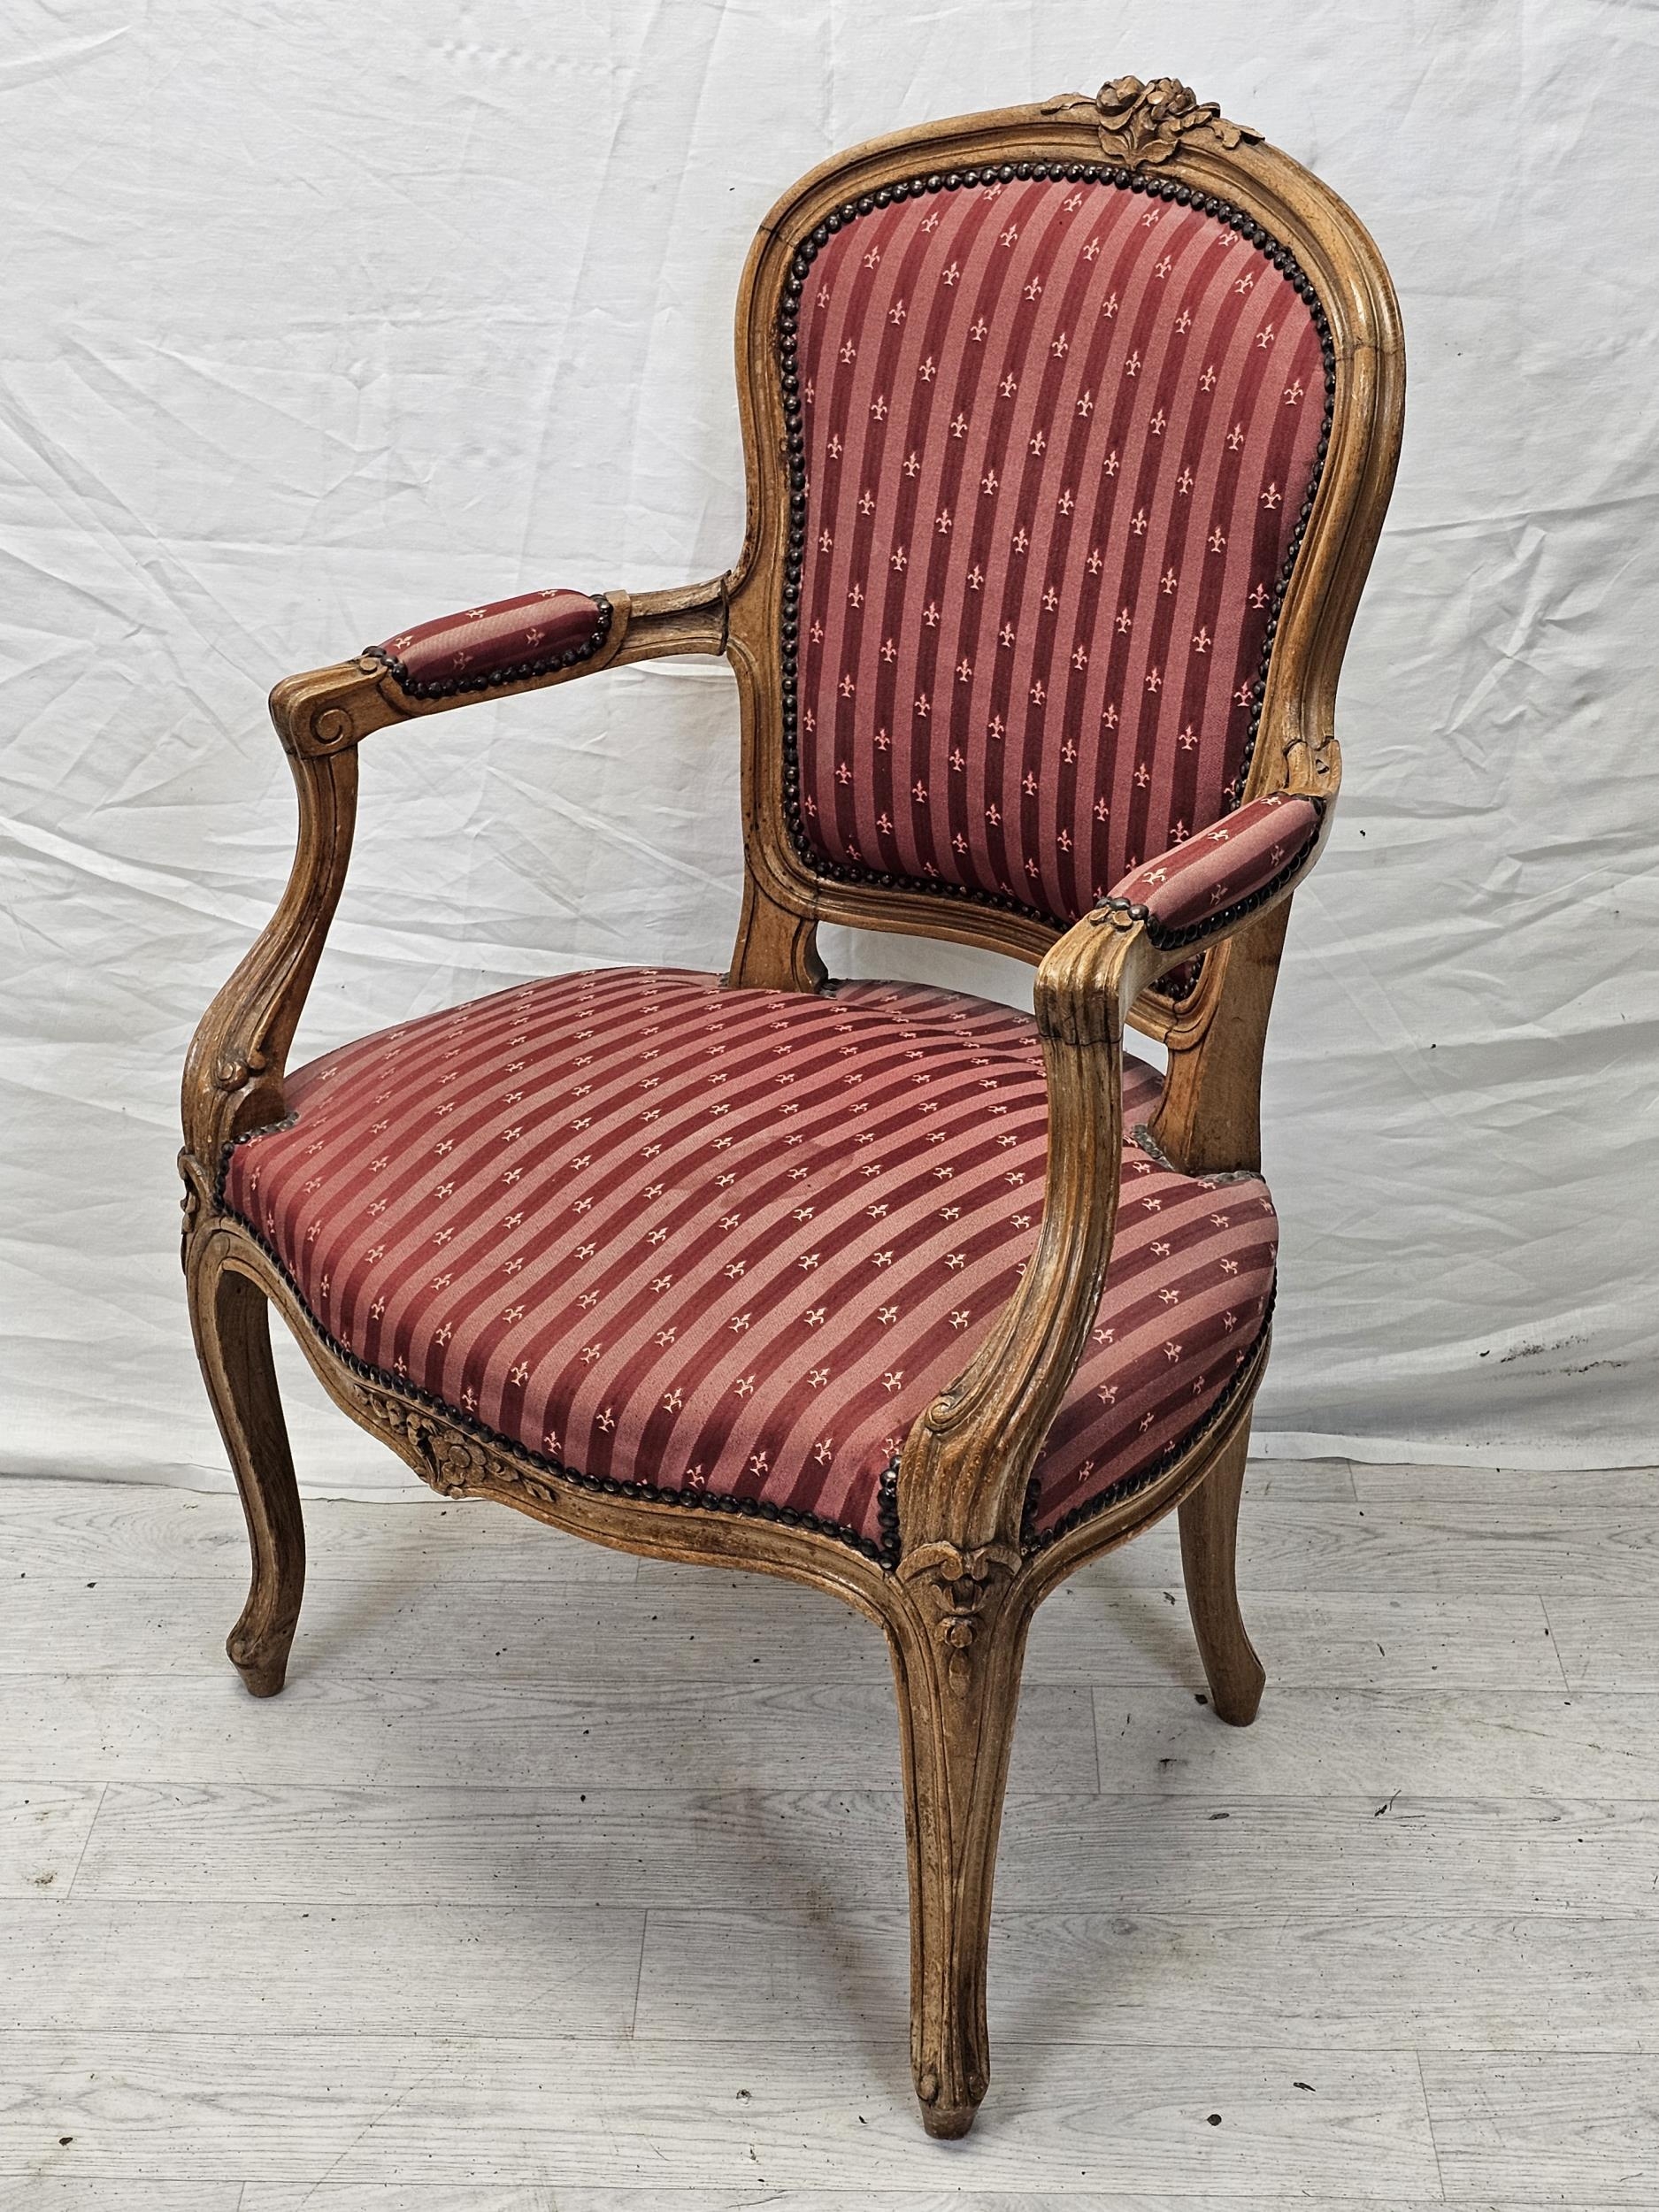 Armchair, French 19th century Provincial style, carved beech. - Image 2 of 7